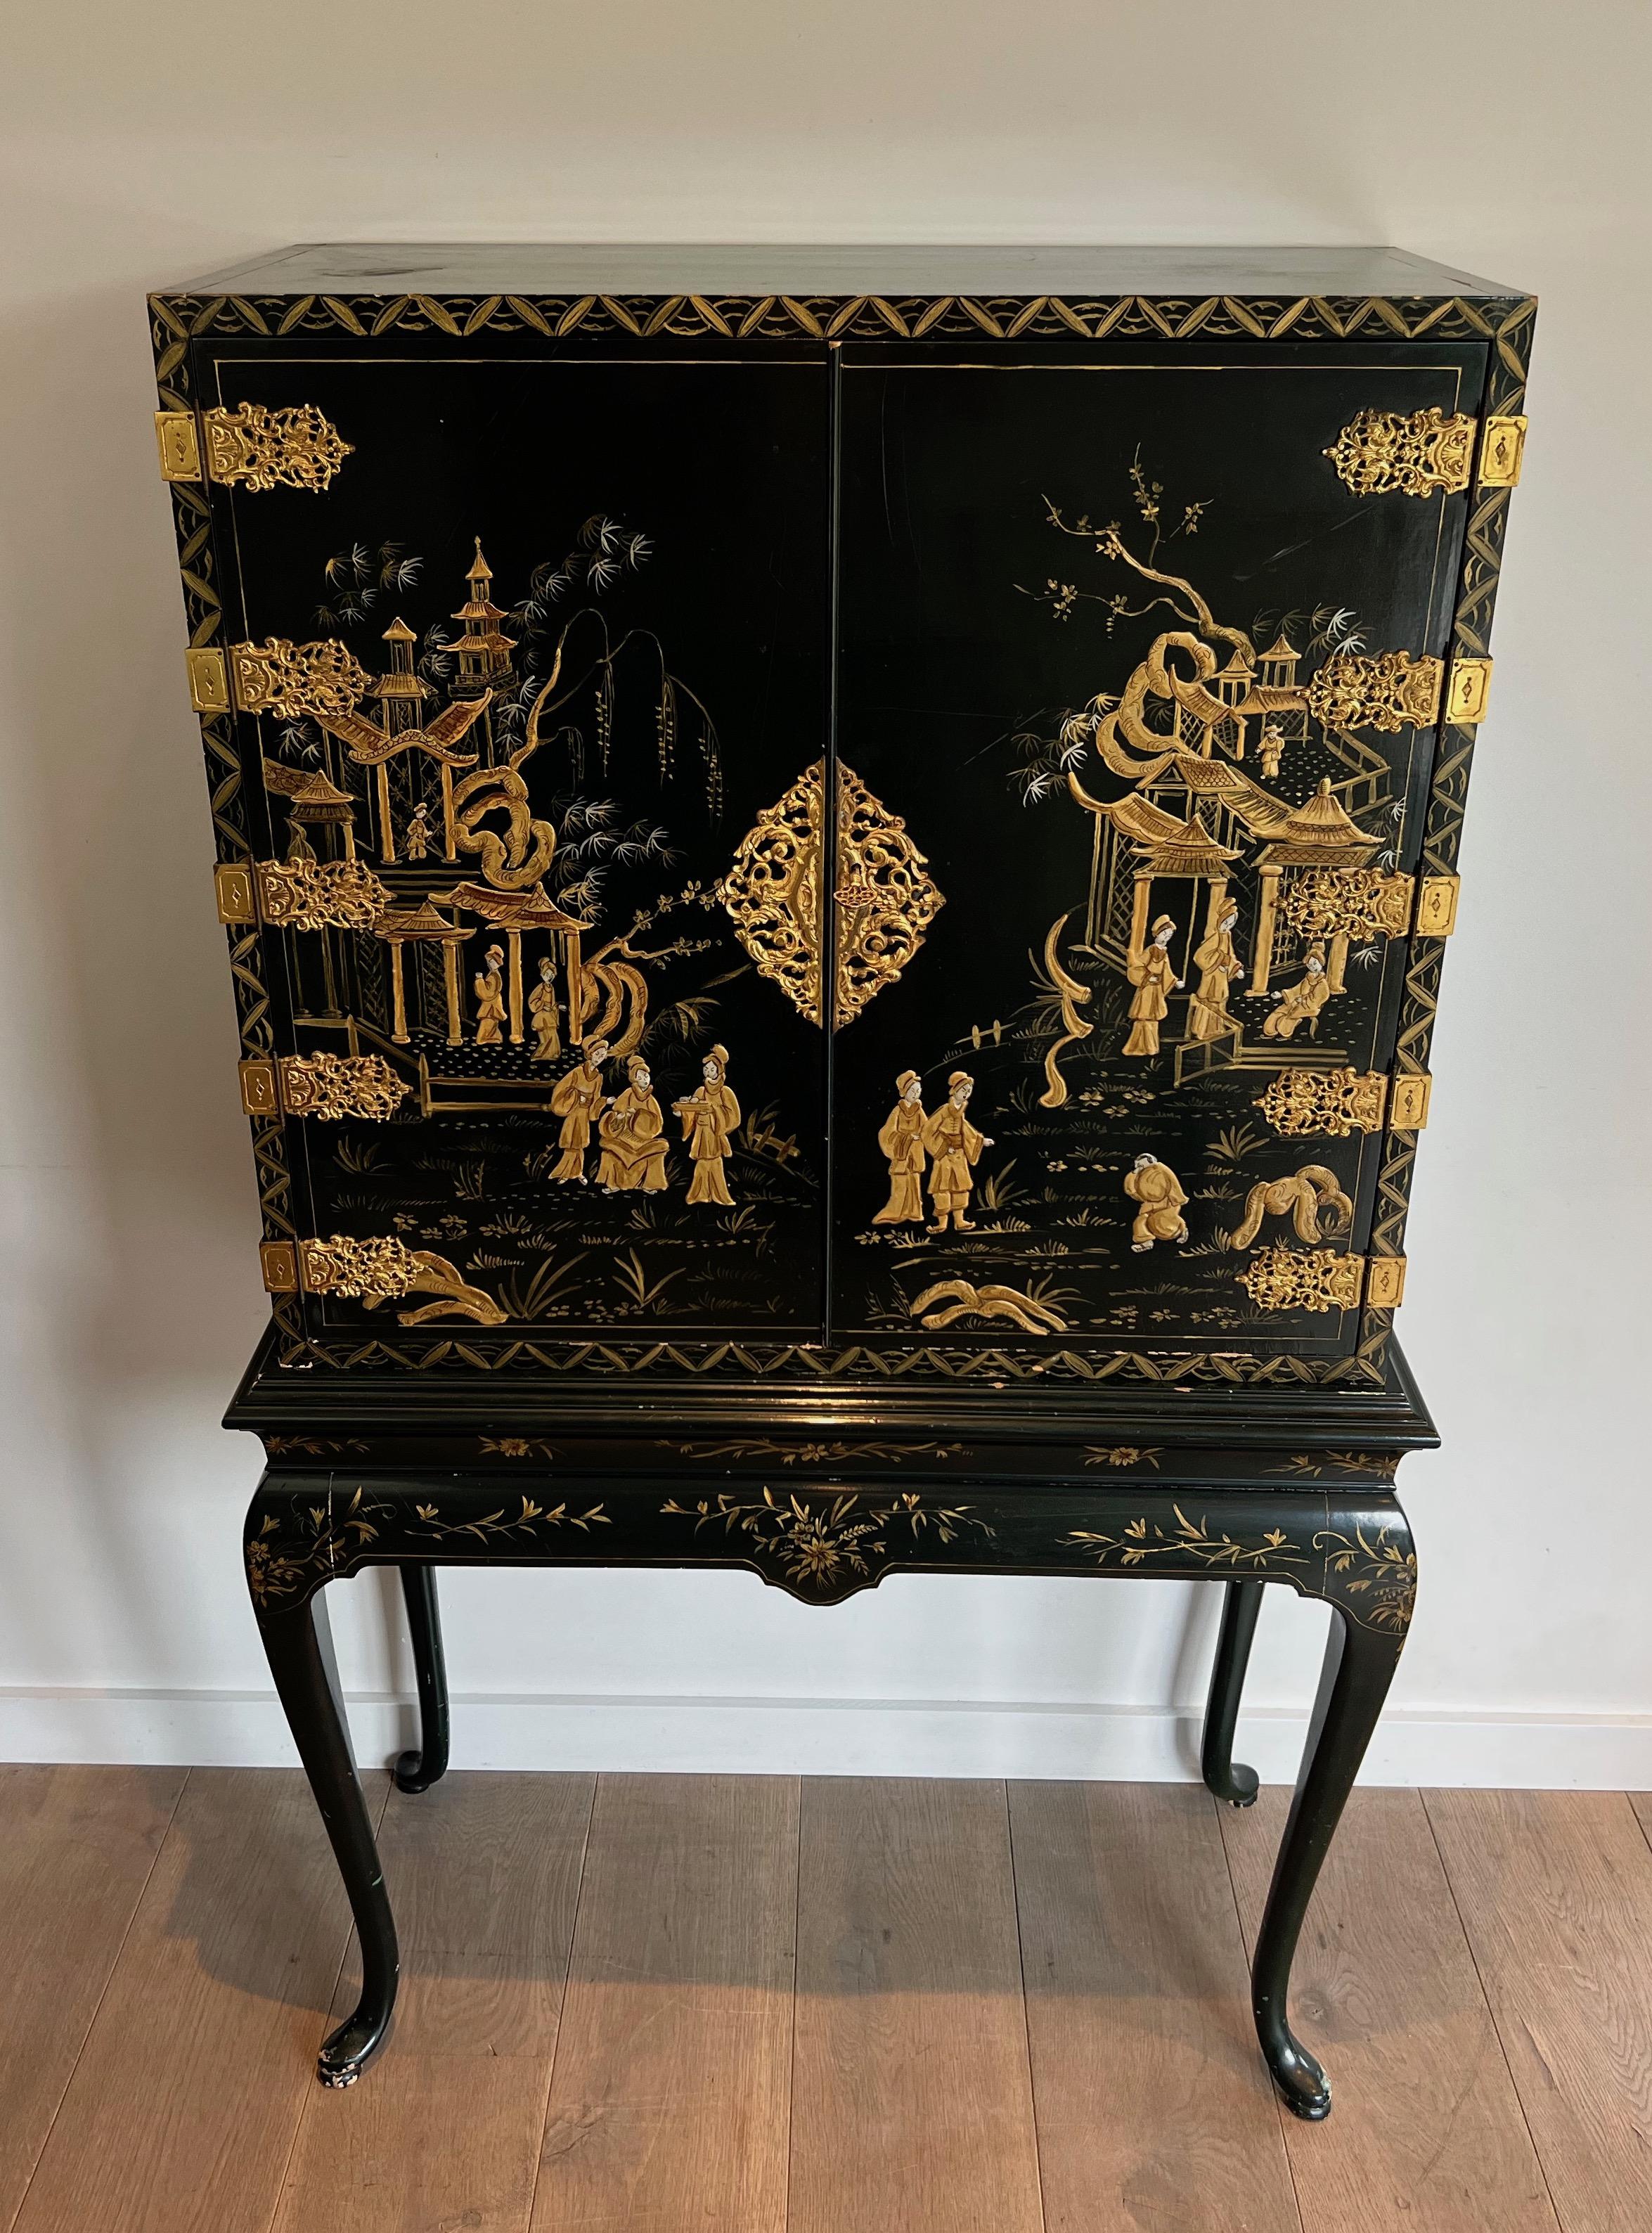 This cabinet is made of green lacquered wood with gilt bronze and chinese life sceenes. The inside part is made of eglomised mirrors. This is a French work, circa 1940.